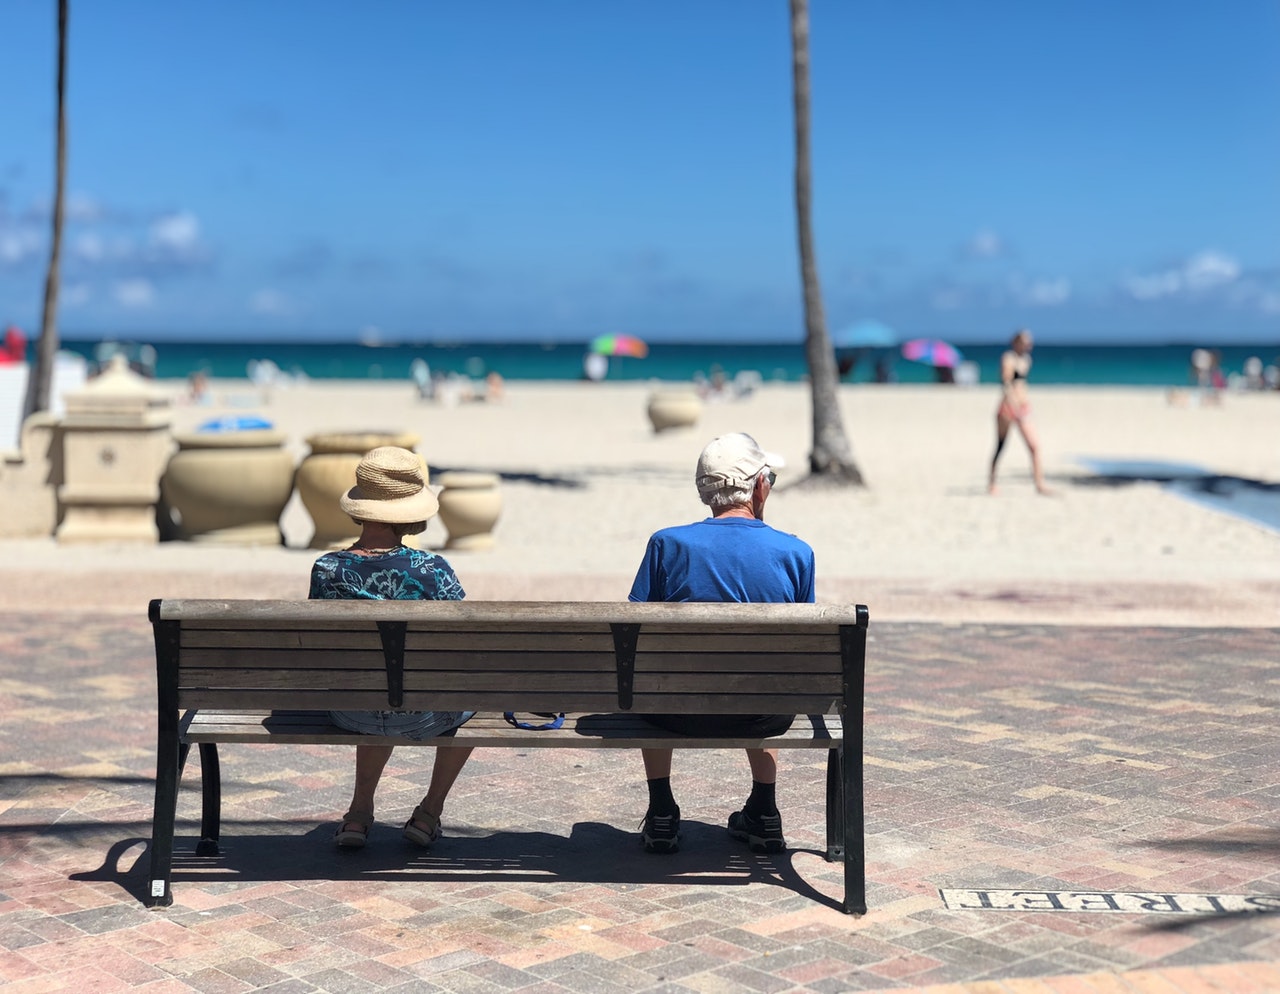 How to choose a good retirement location